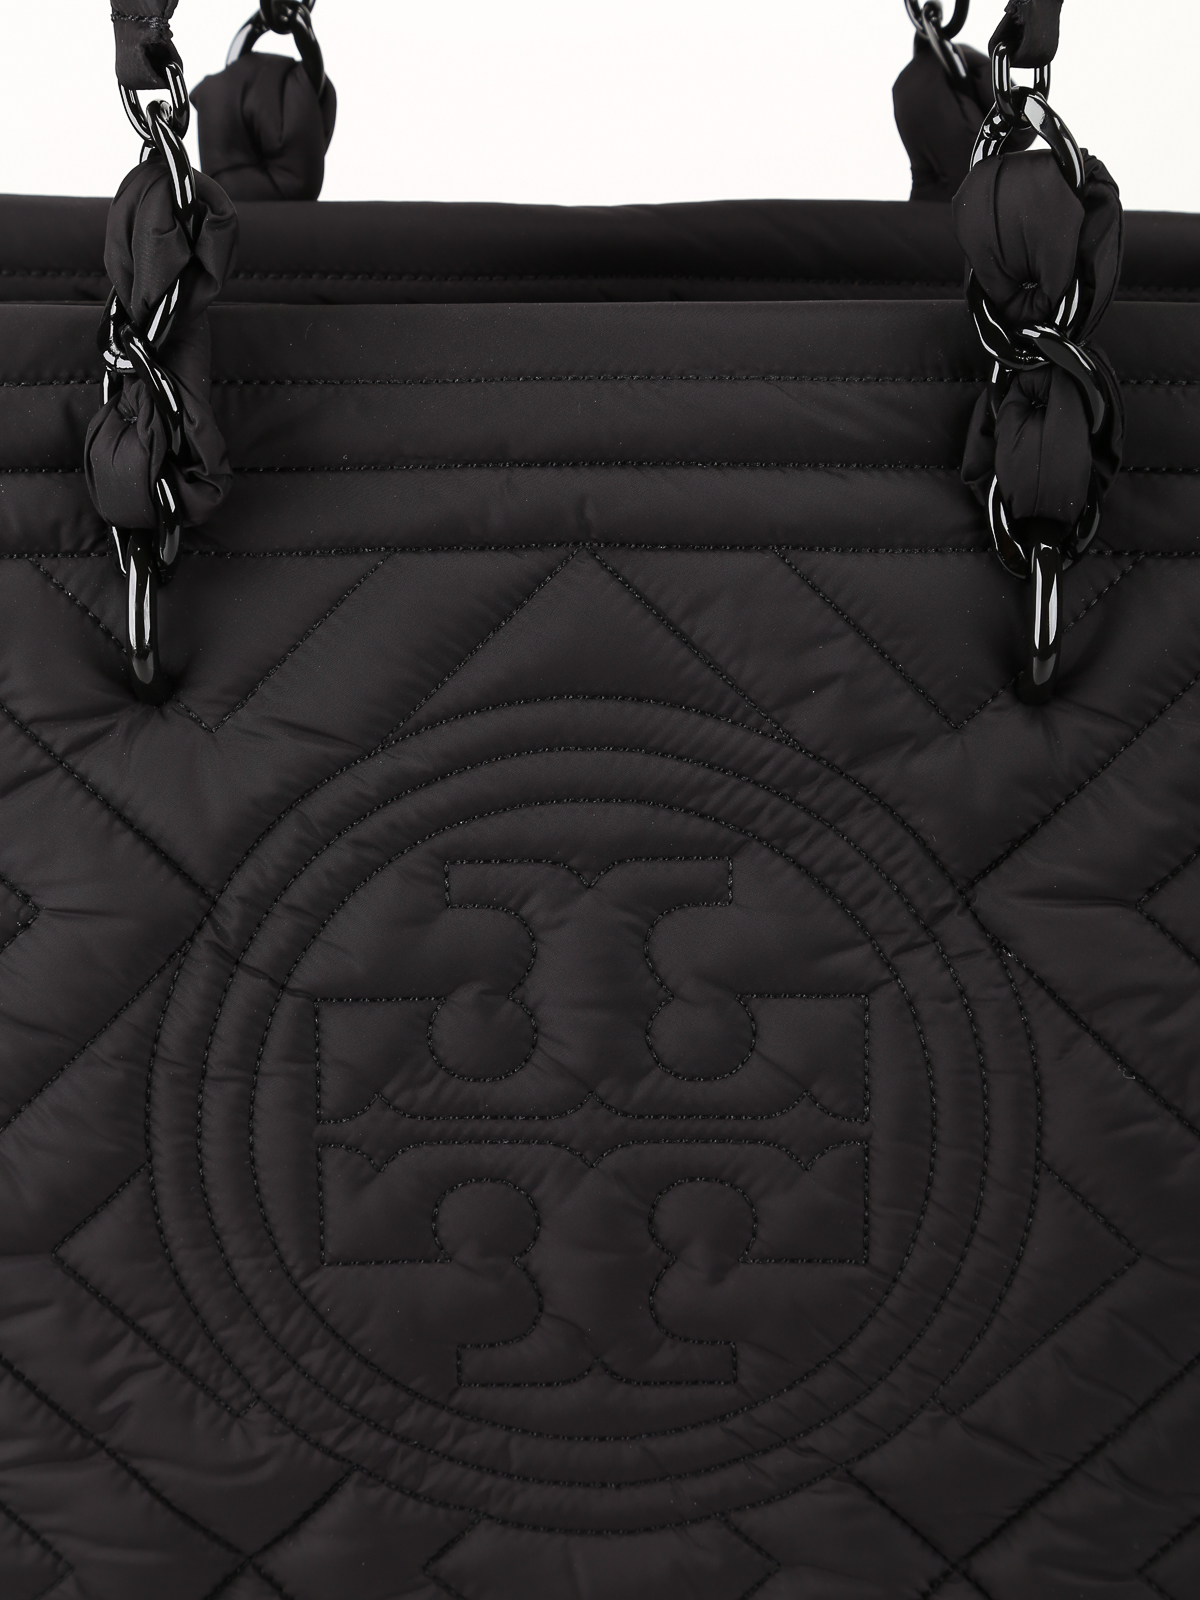 Totes bags Tory Burch - Fleming quilted nylon tote bag - 58426001